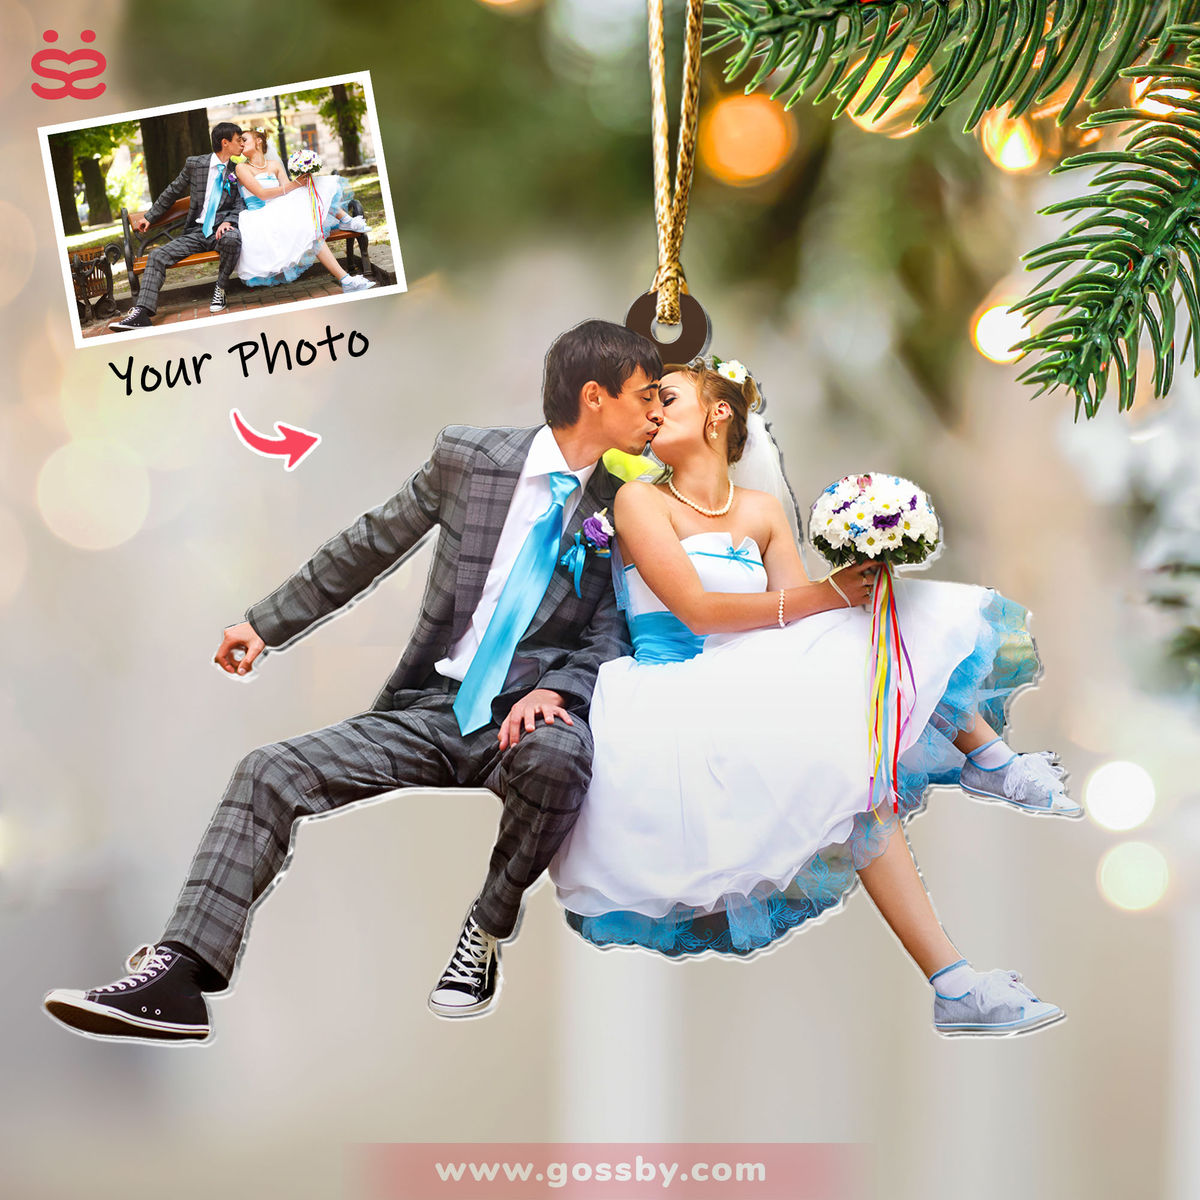 Photo Background Removal - Customized Your Photo Ornaments - Wedding Gift - Gift for Couple - Couple Photo Gifts, Christmas Gifts for Couple_3